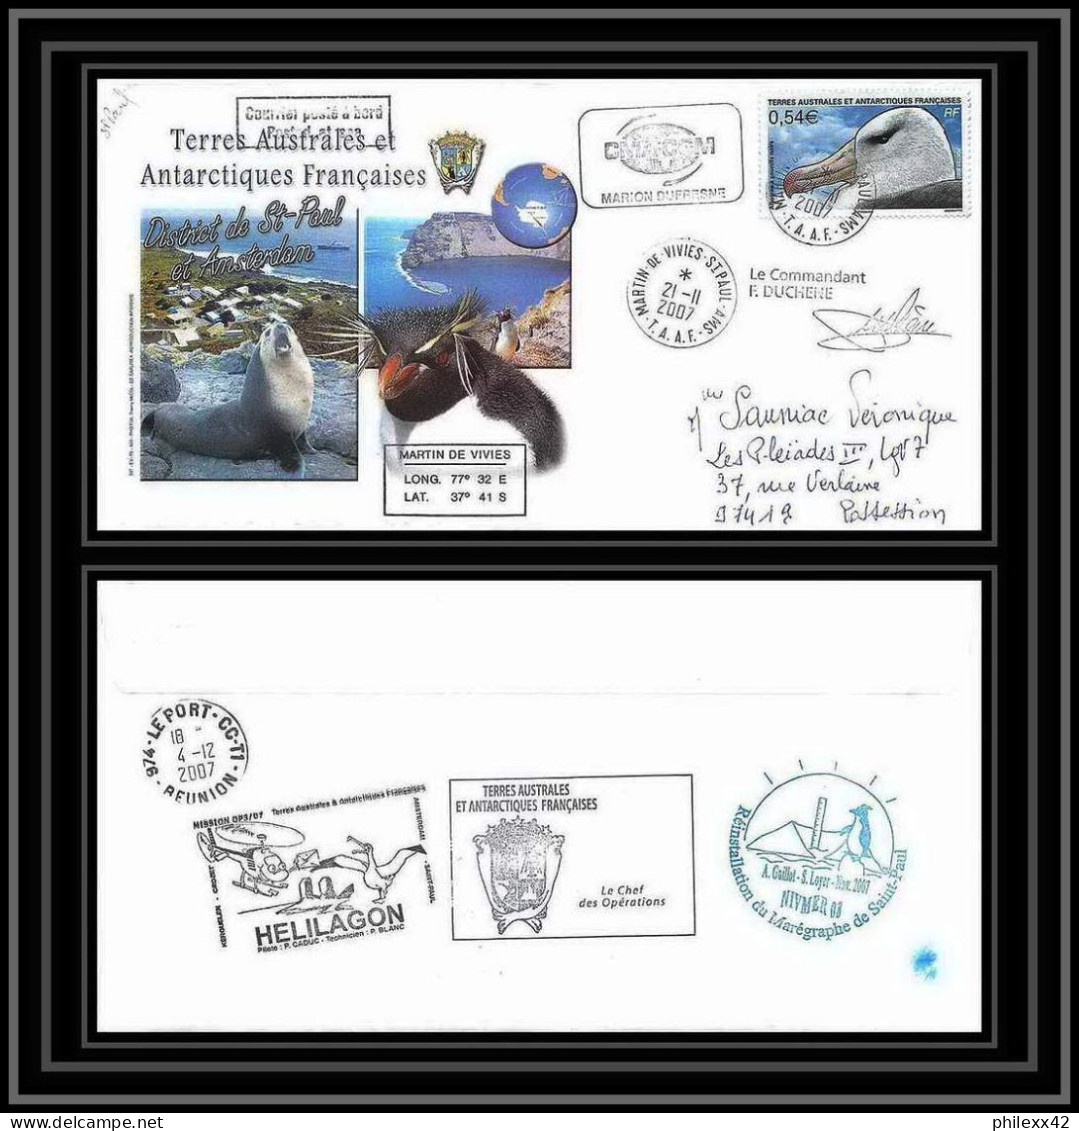 2727 Helilagon Terres Australes TAAF Lettre Cover Dufresne 2 Signé Signed Marégraphe N°466 21/11/2007 St Paul - Hubschrauber